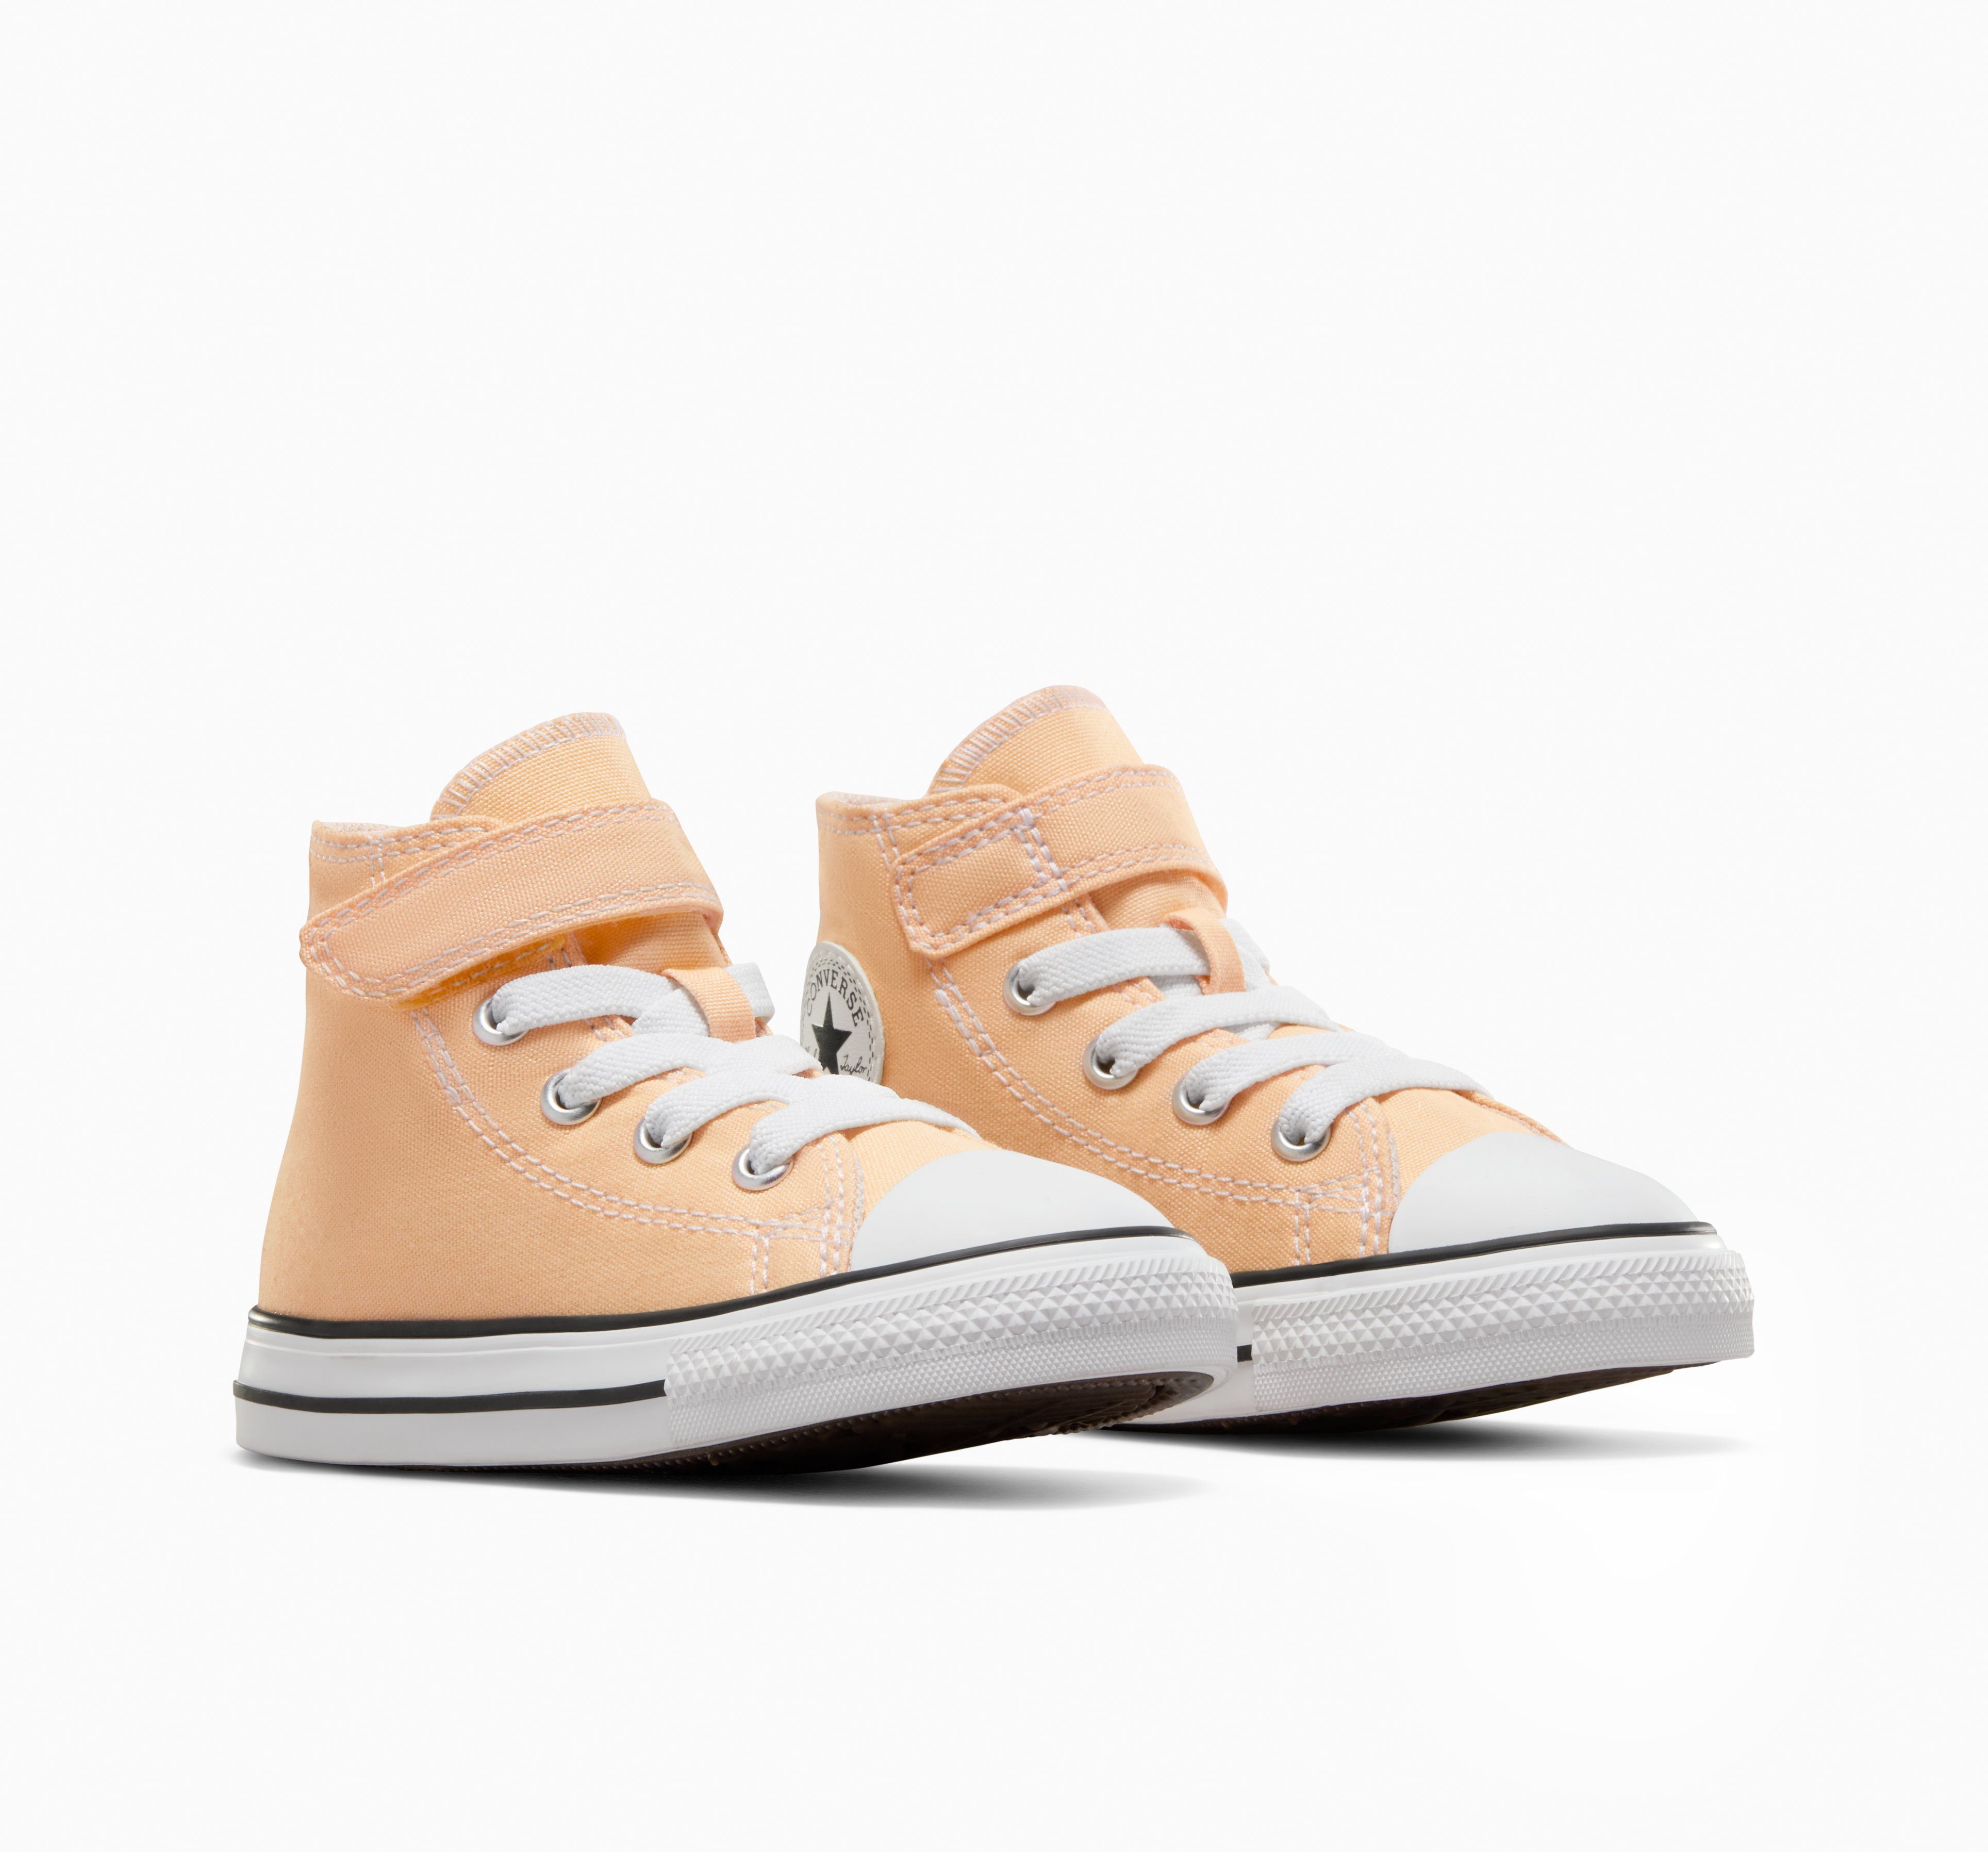 Converse CHUCK TAYLOR ALL STAR EASY ON Sneaker